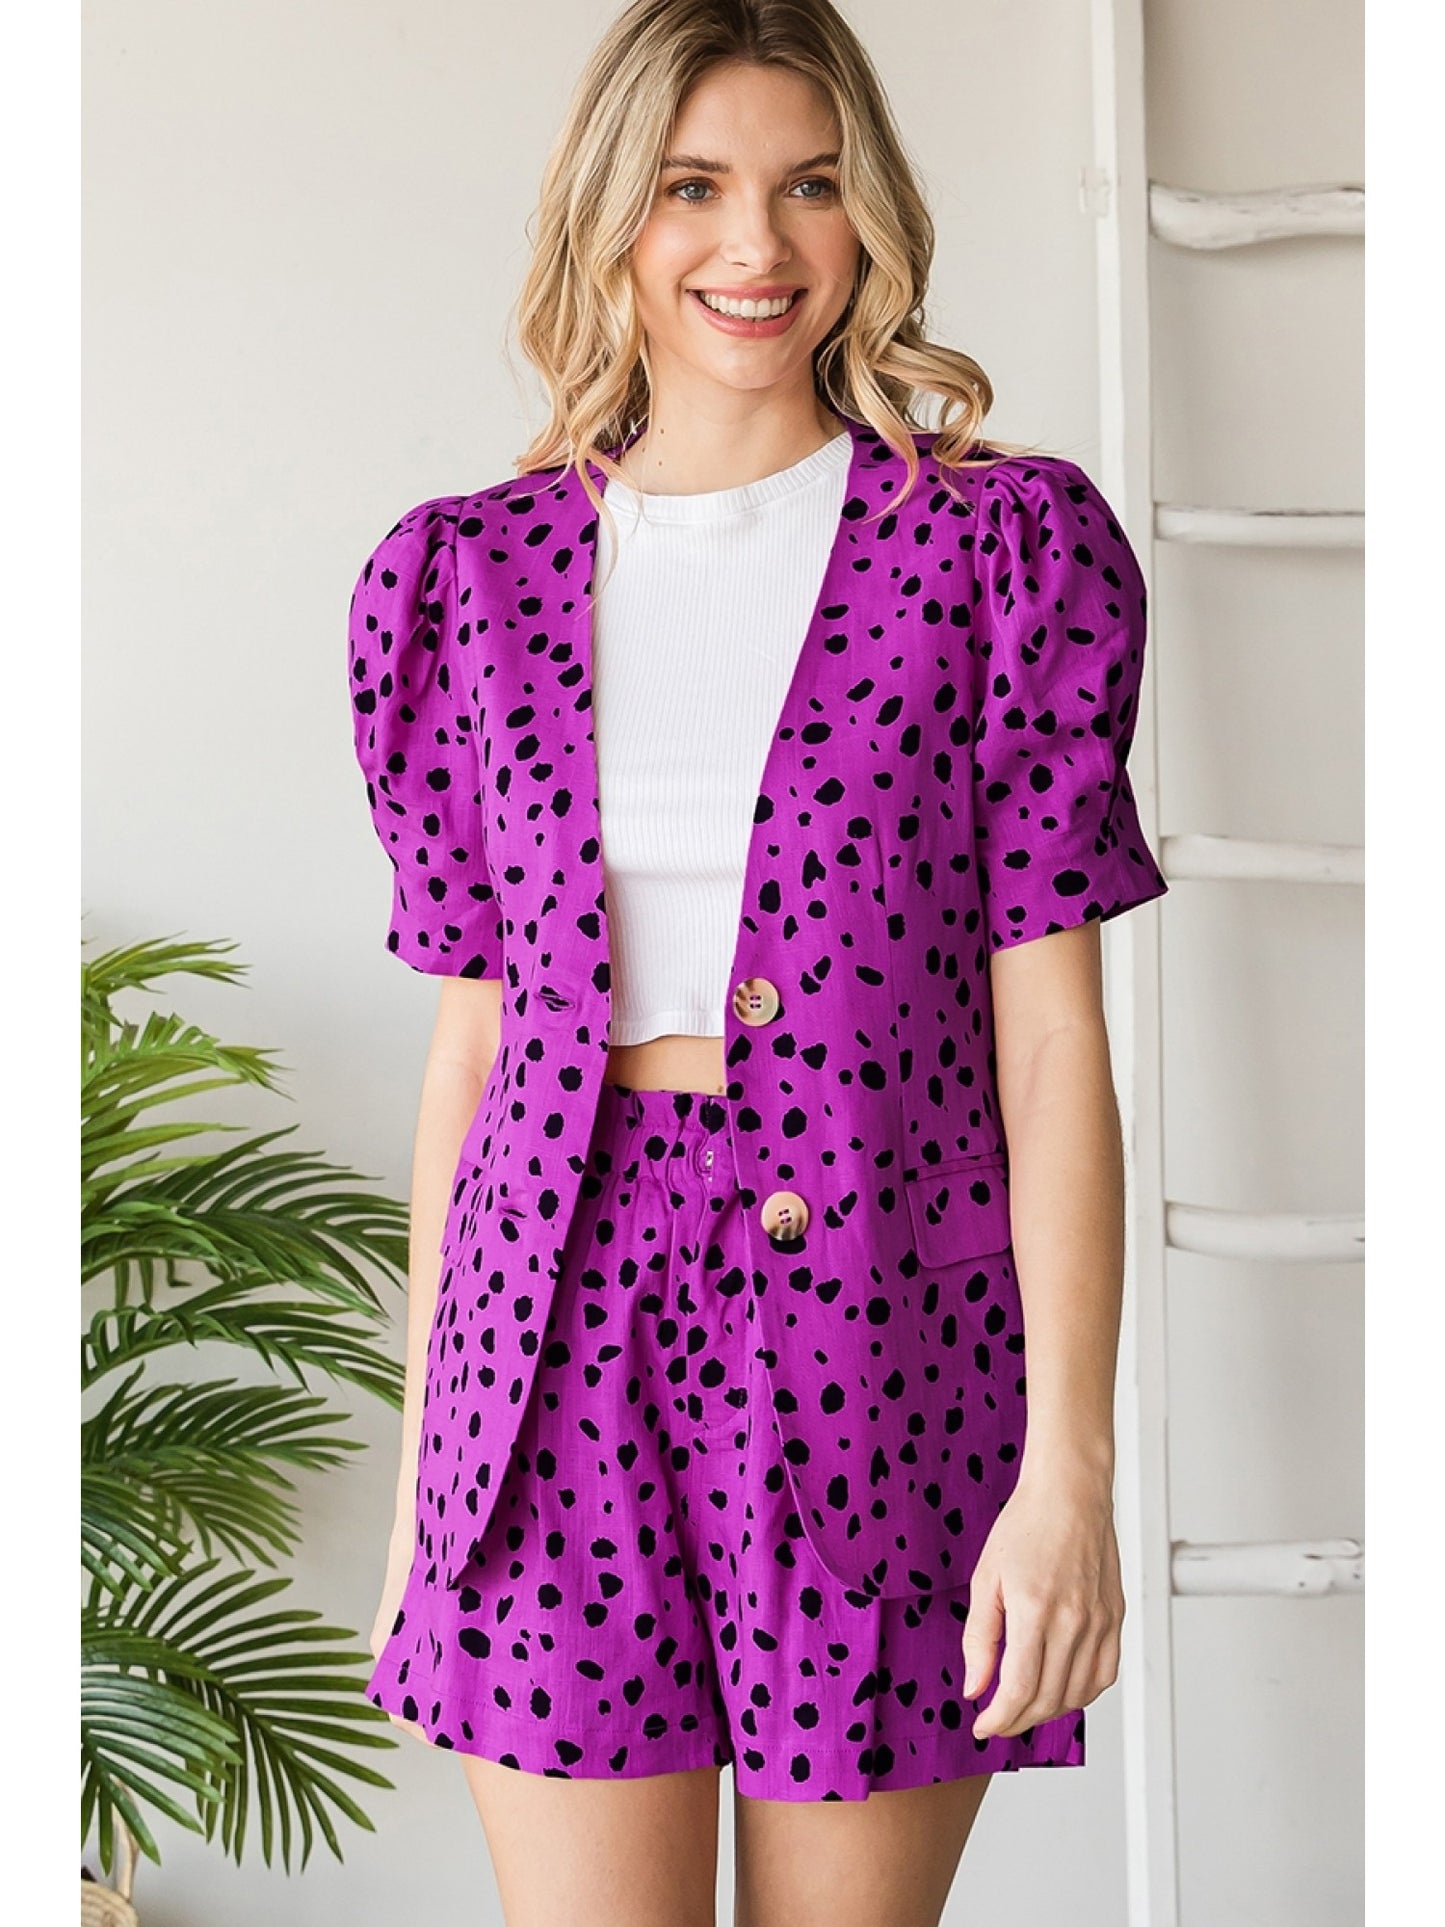 Magenta Spotted Print Jacket with Puff Short Sleeves